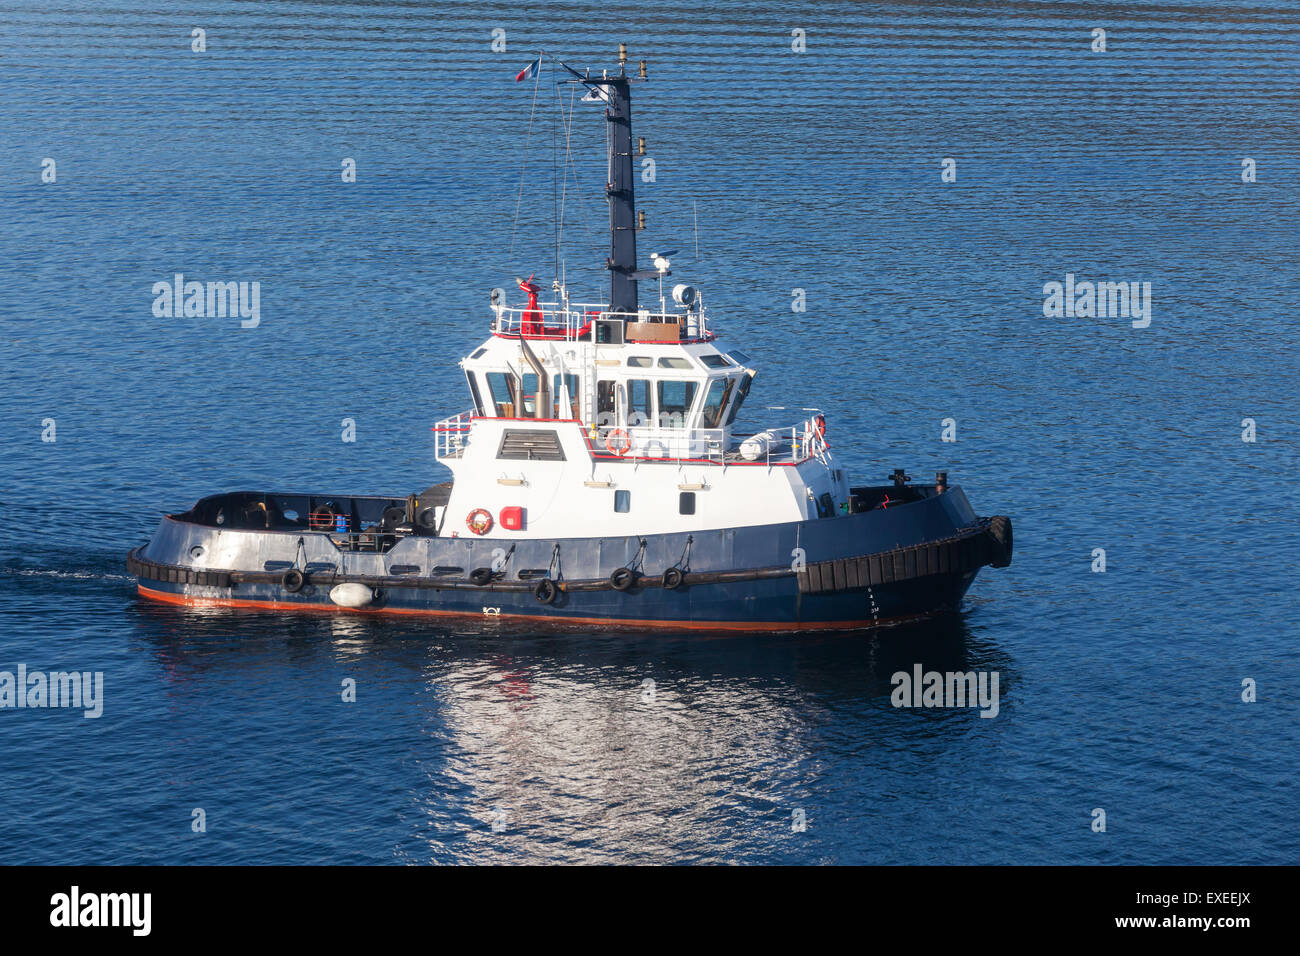 Tug boat with white superstructure and dark blue hull underway, side view Stock Photo